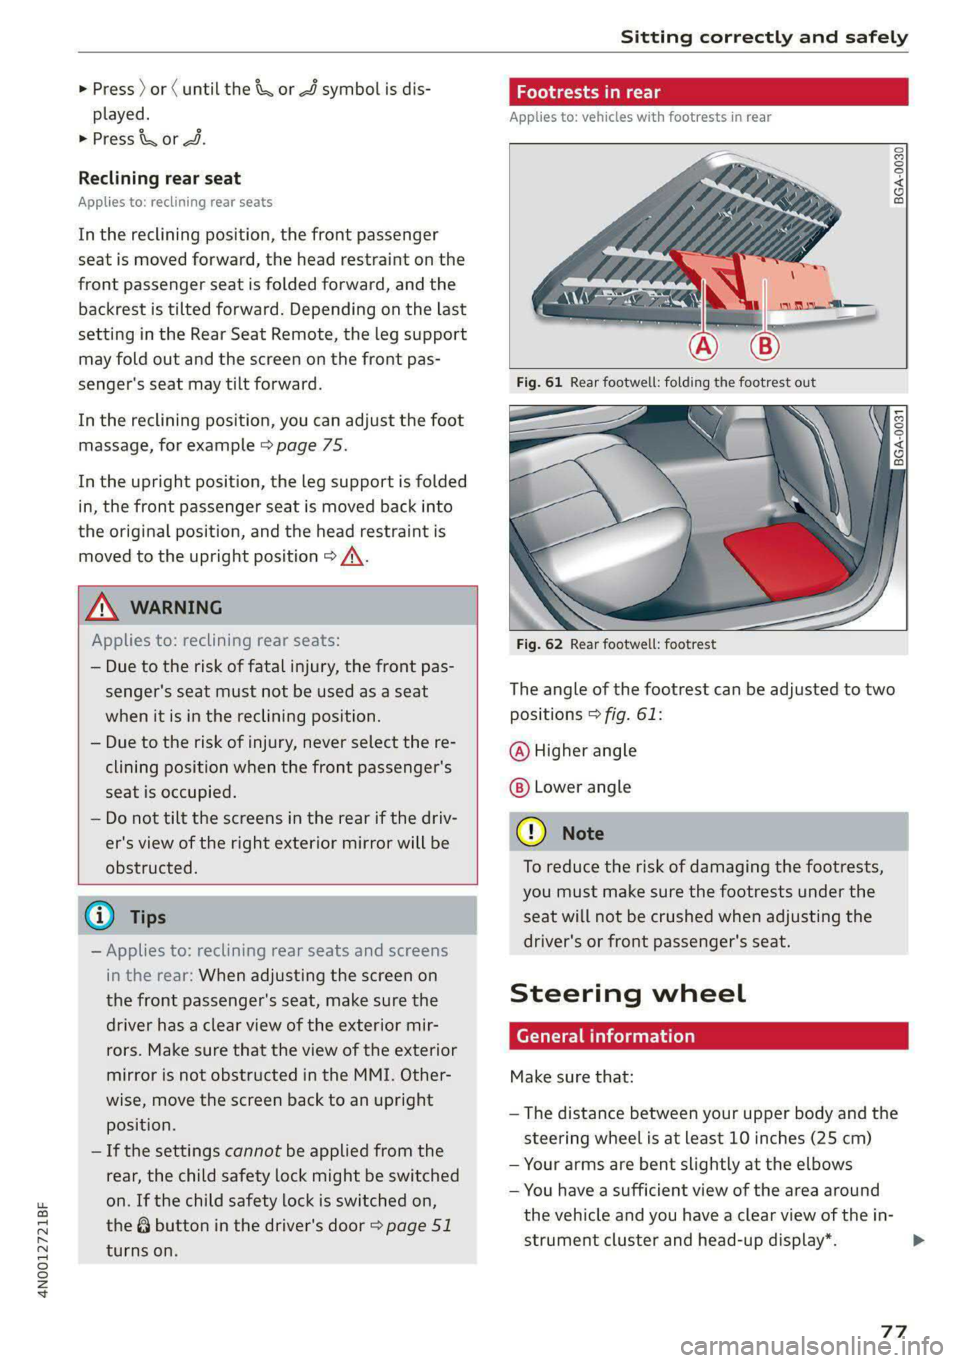 AUDI A8 2021  Owners Manual 4N0012721BF 
Sitting correctly and safely 
  
> Press ) or (until the & or J symbol is dis- 
played. 
> Press & or J. 
Reclining rear seat 
Applies to: reclining rear seats 
In the reclining position,